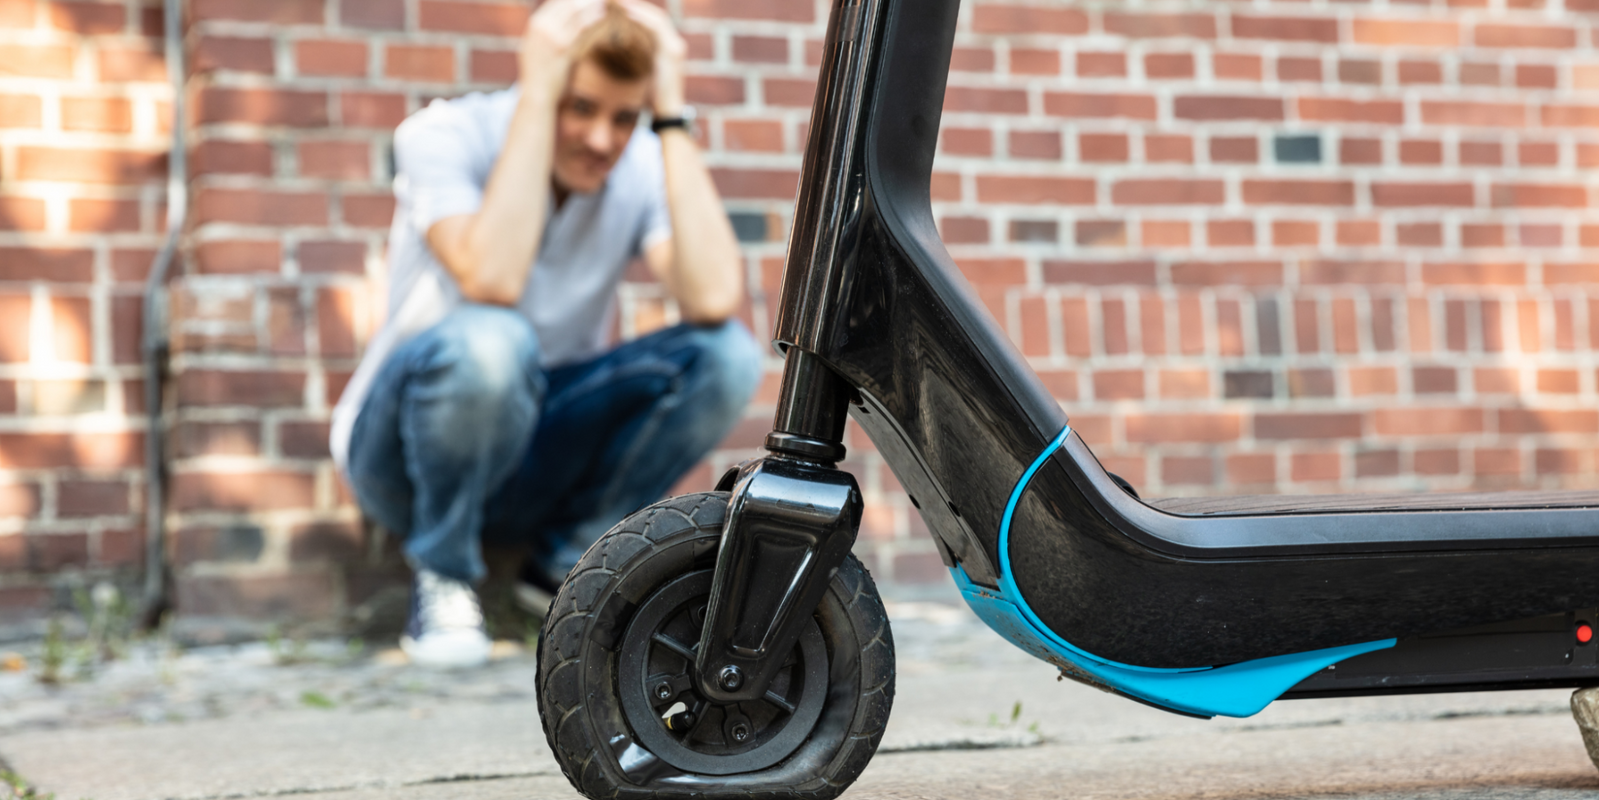 Preventative Maintenance For Electric Scooters: Why It's Important 